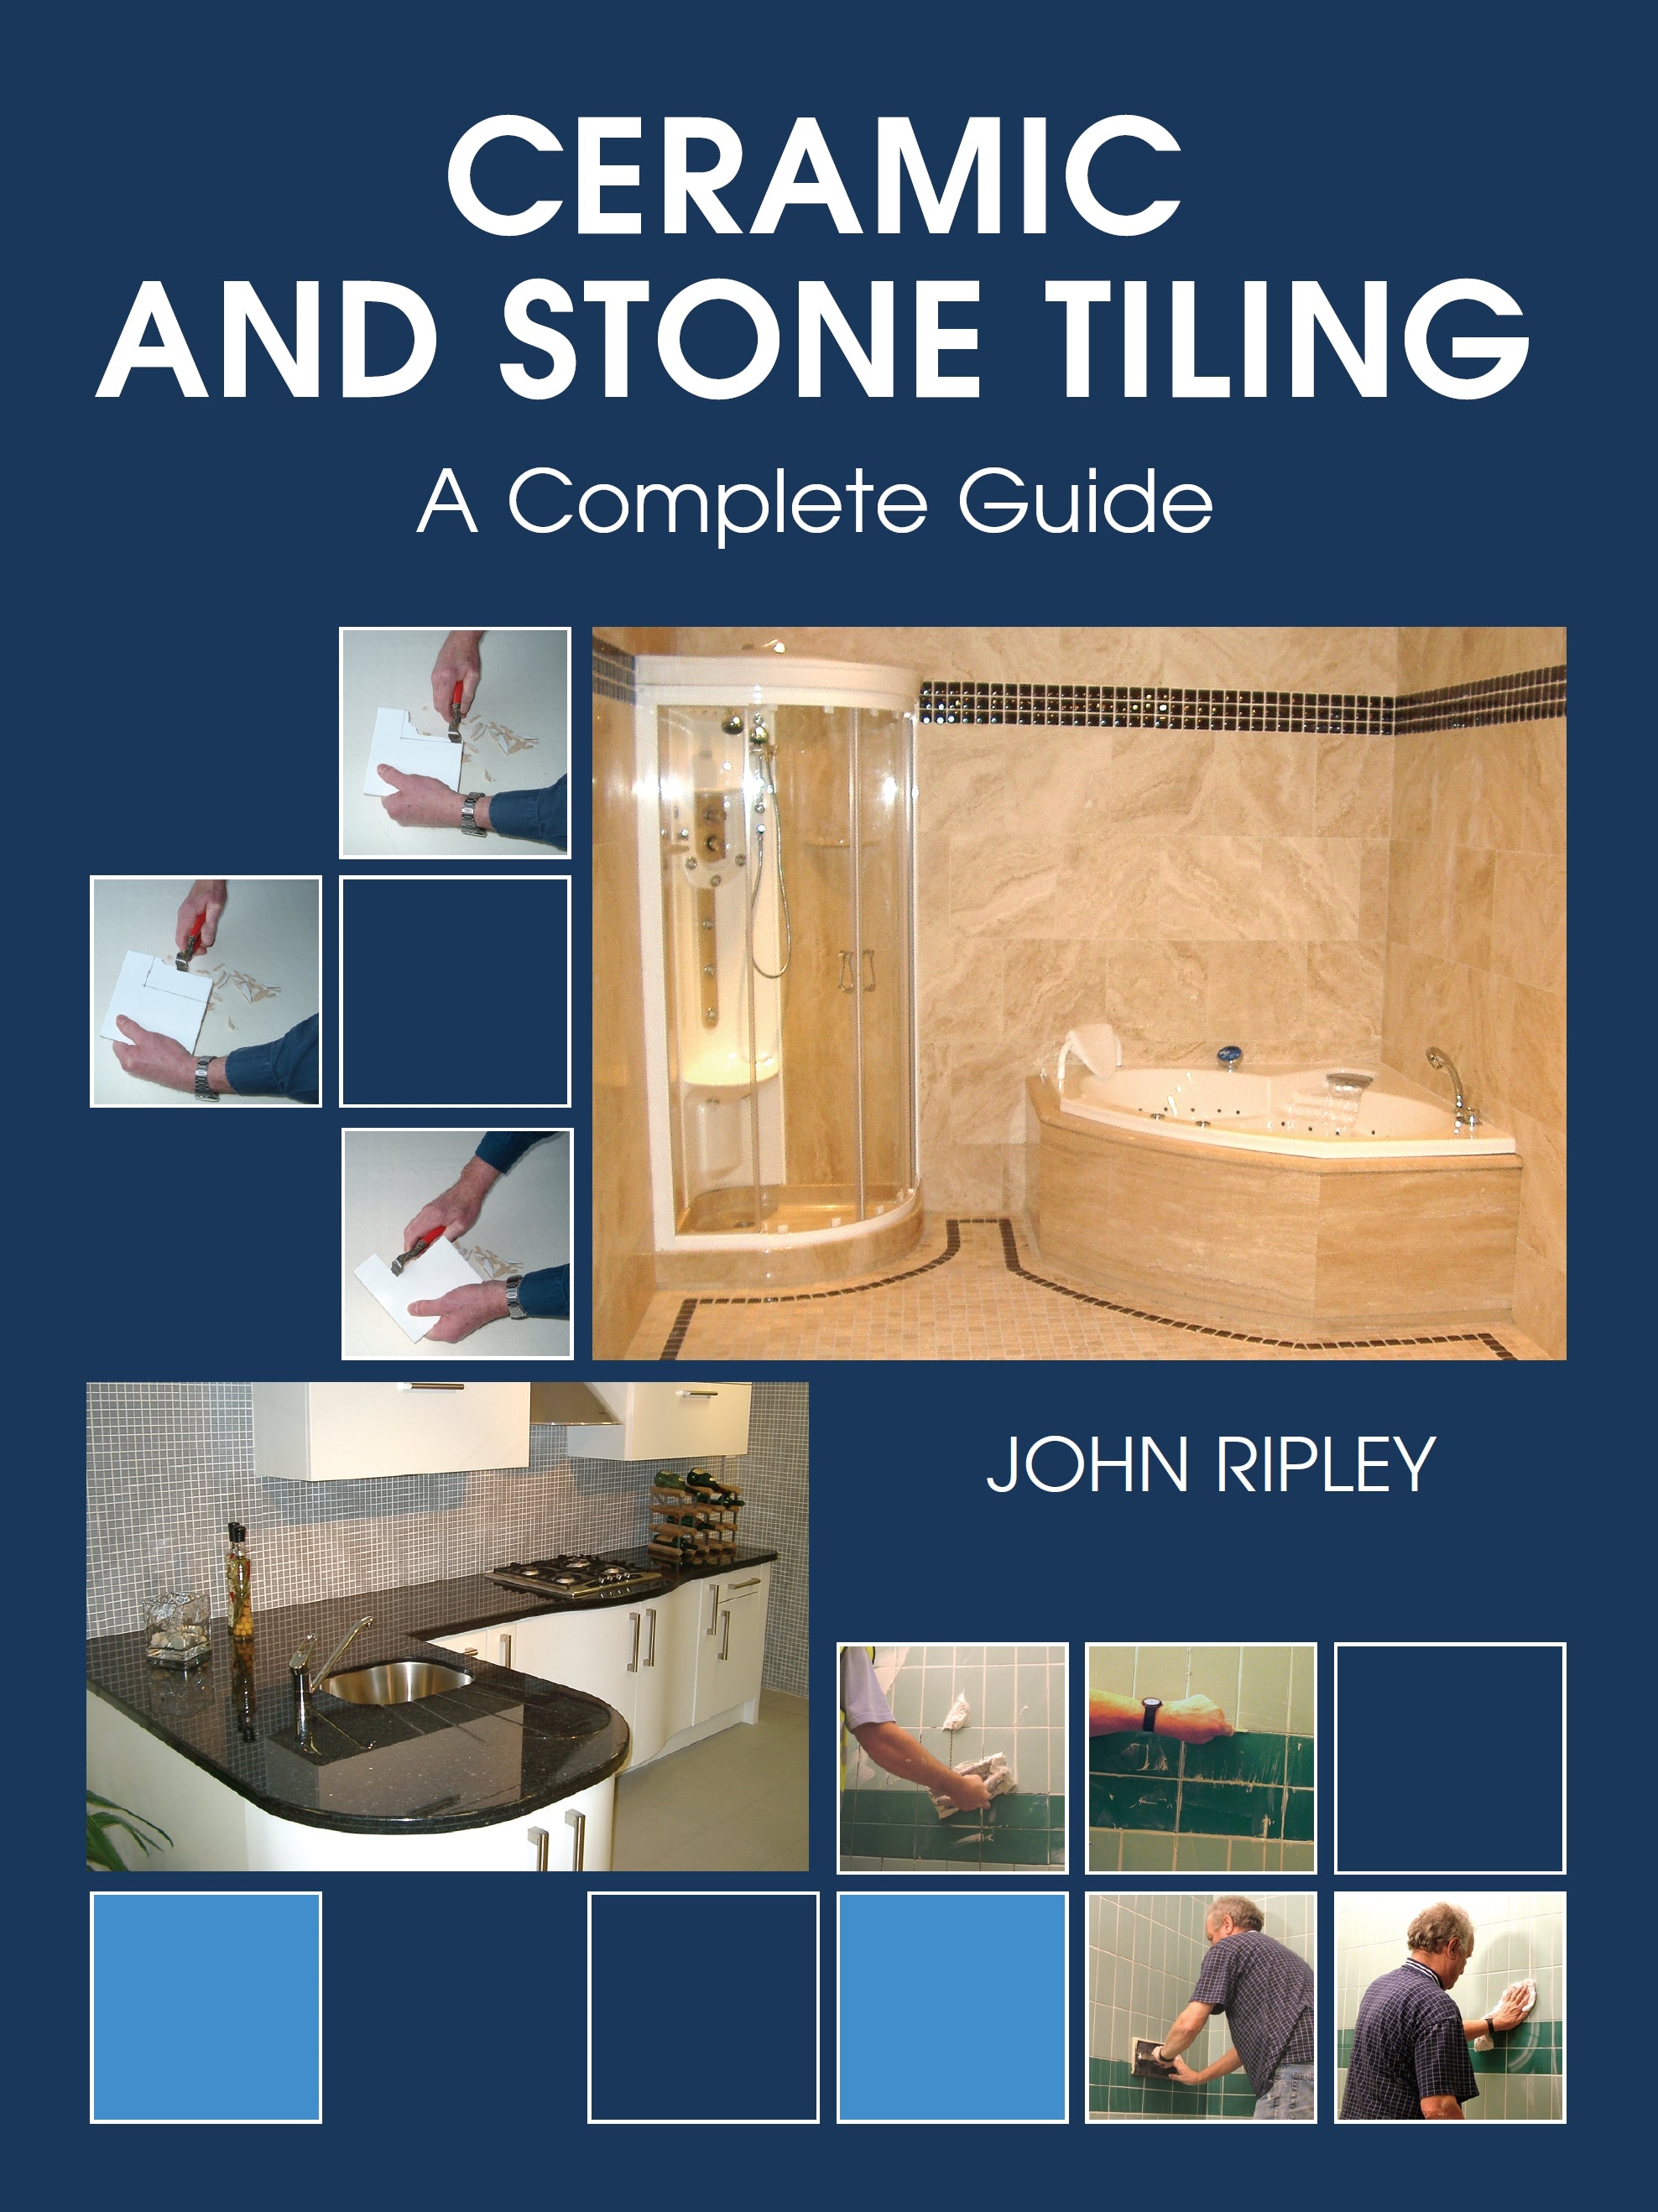 Ceramic and Stone Tiling - A Complete Guide